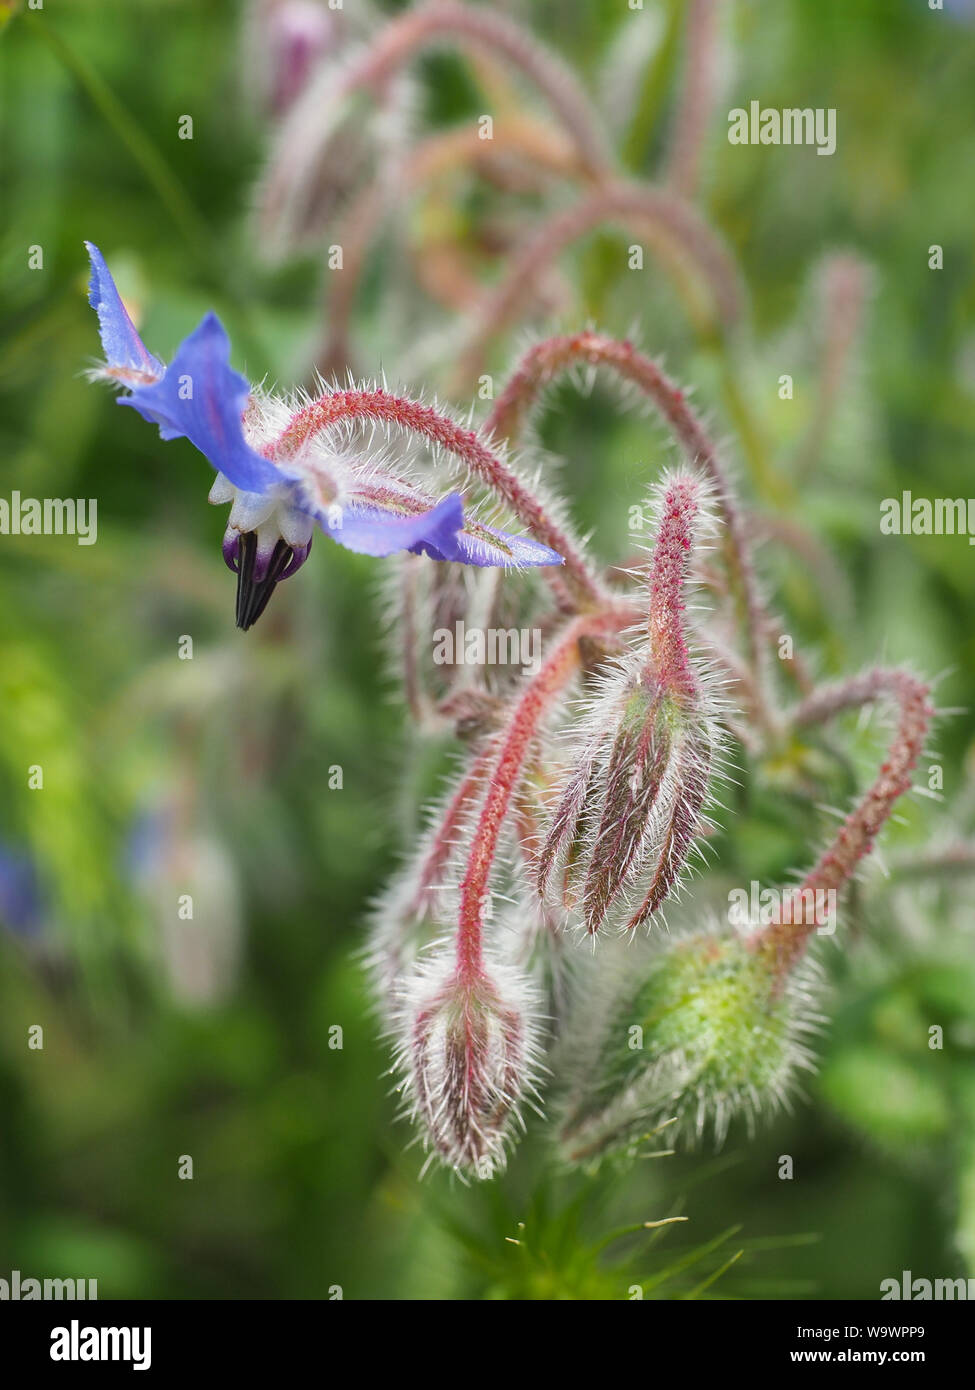 Charming blue Borage blossom with buds close up. Wild Borago officinalis or starflower is an annual herb in the flowering plant Boraginaceae family. Stock Photo